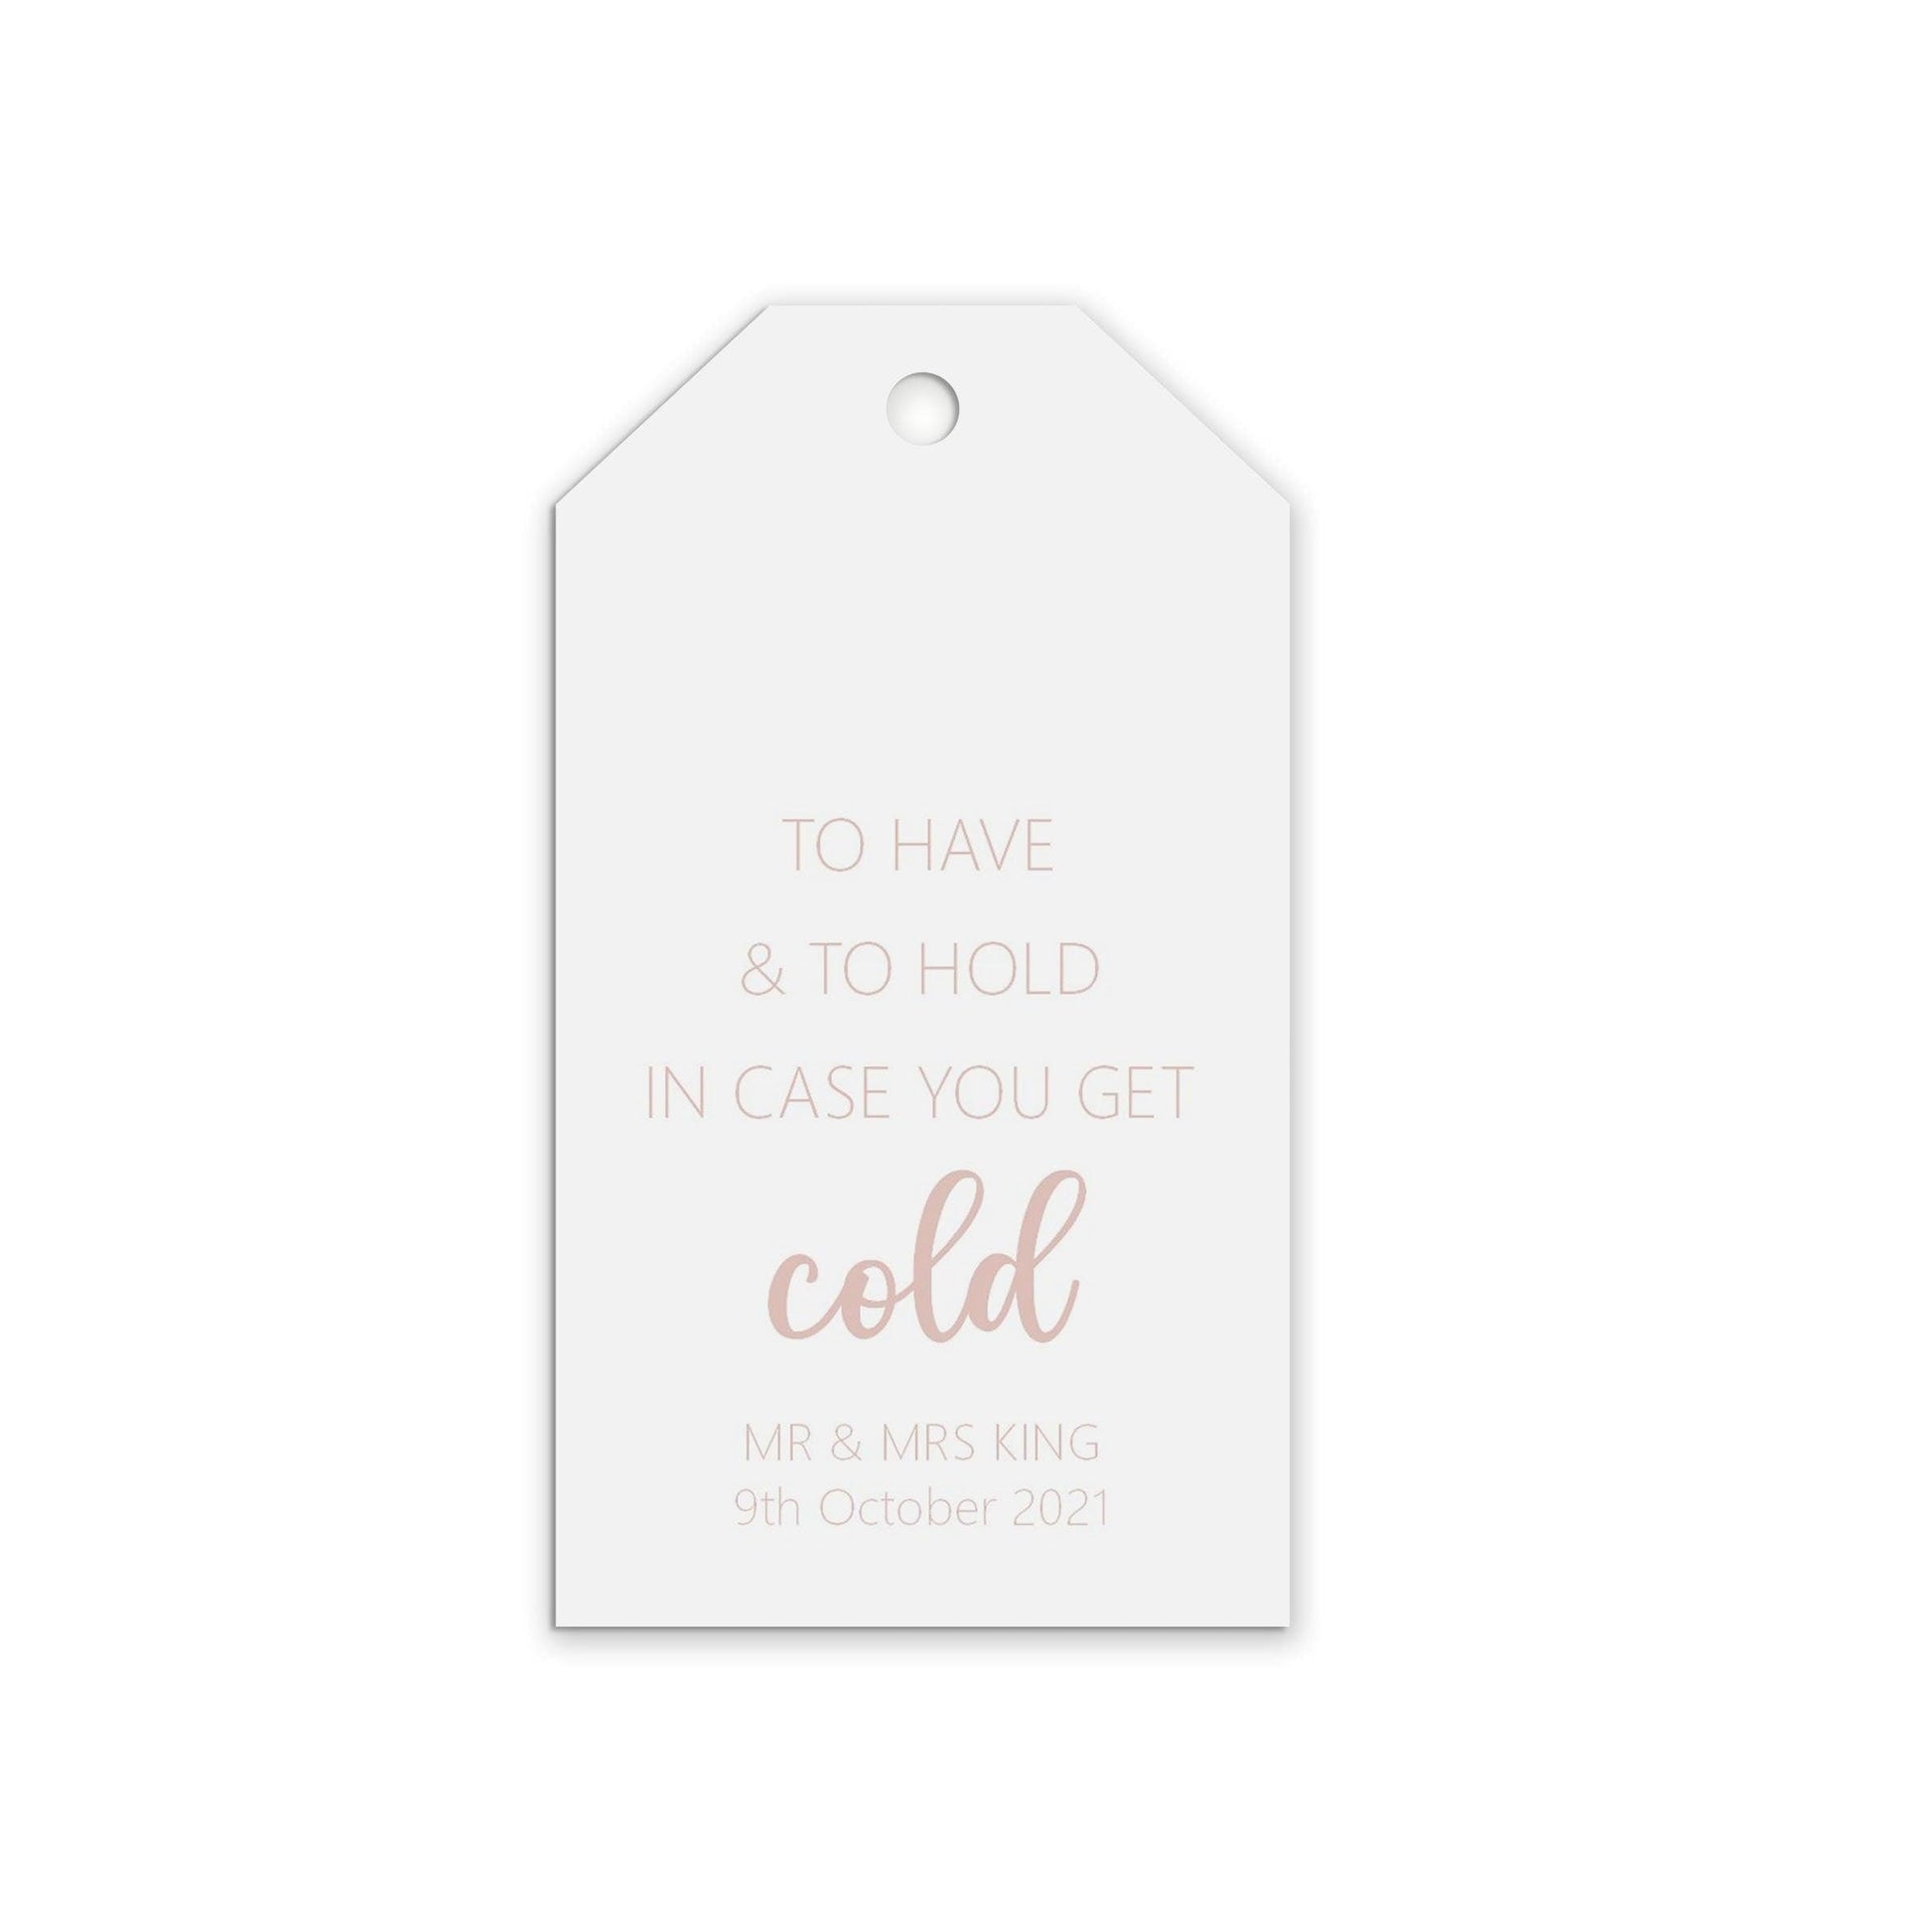  To Have & To Hold In Case You Get Cold, Rose Gold Effect Personalised Gift Tags, Pack of 10 by PMPRINTED 